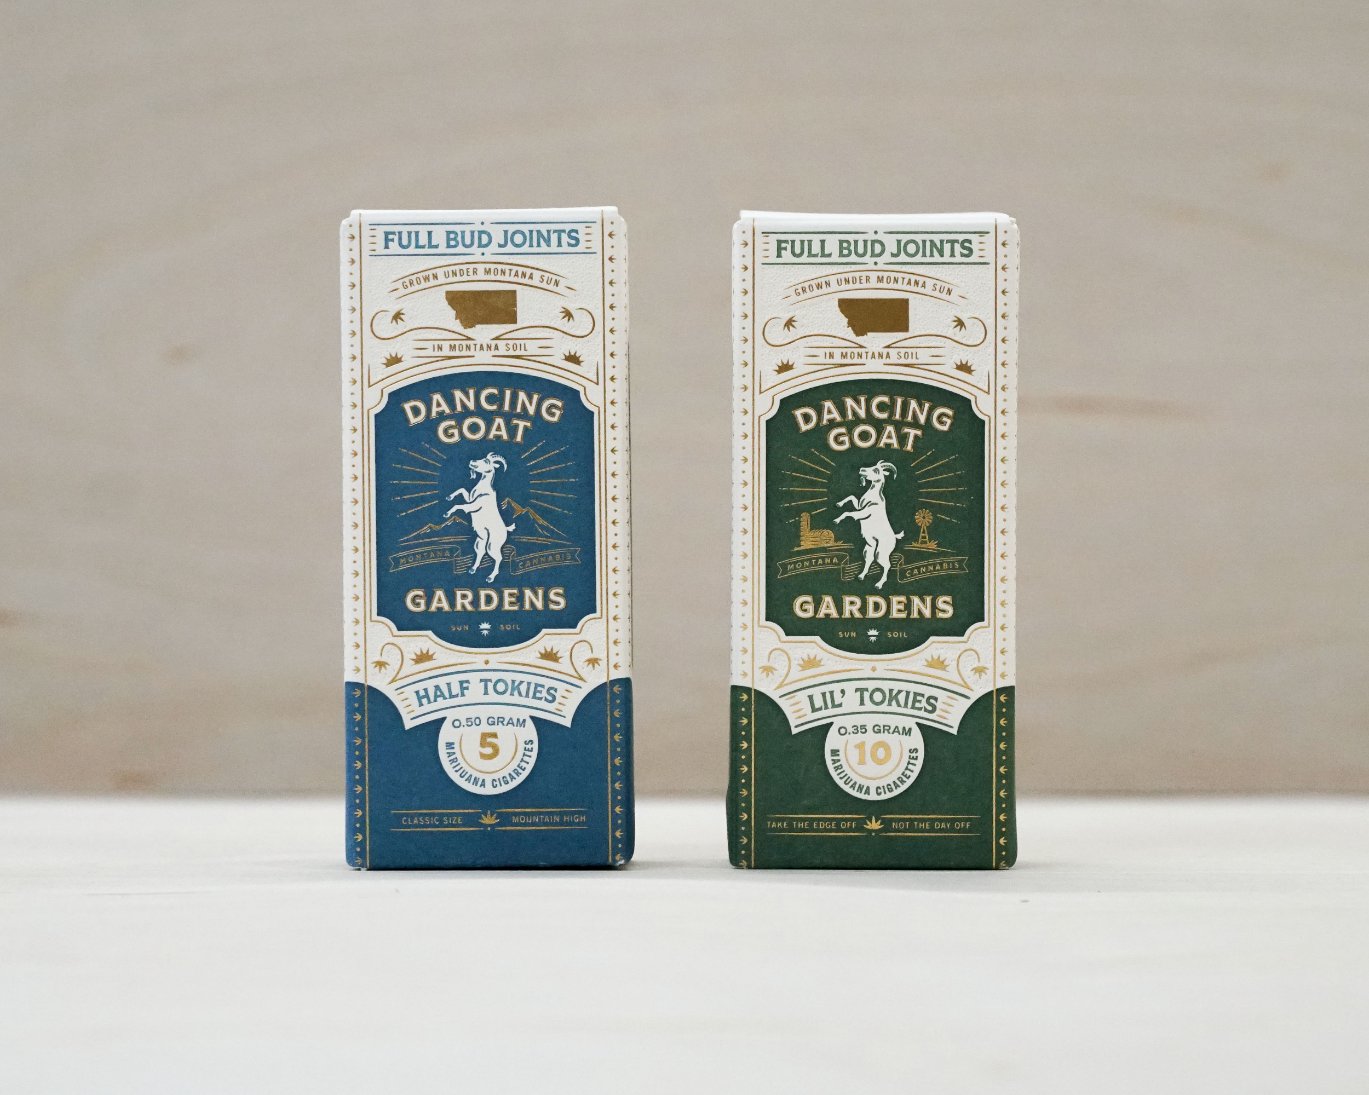 Dancing Goat Gardens Infuses Cannabis with the Rugged Style of Old Cigarette Branding